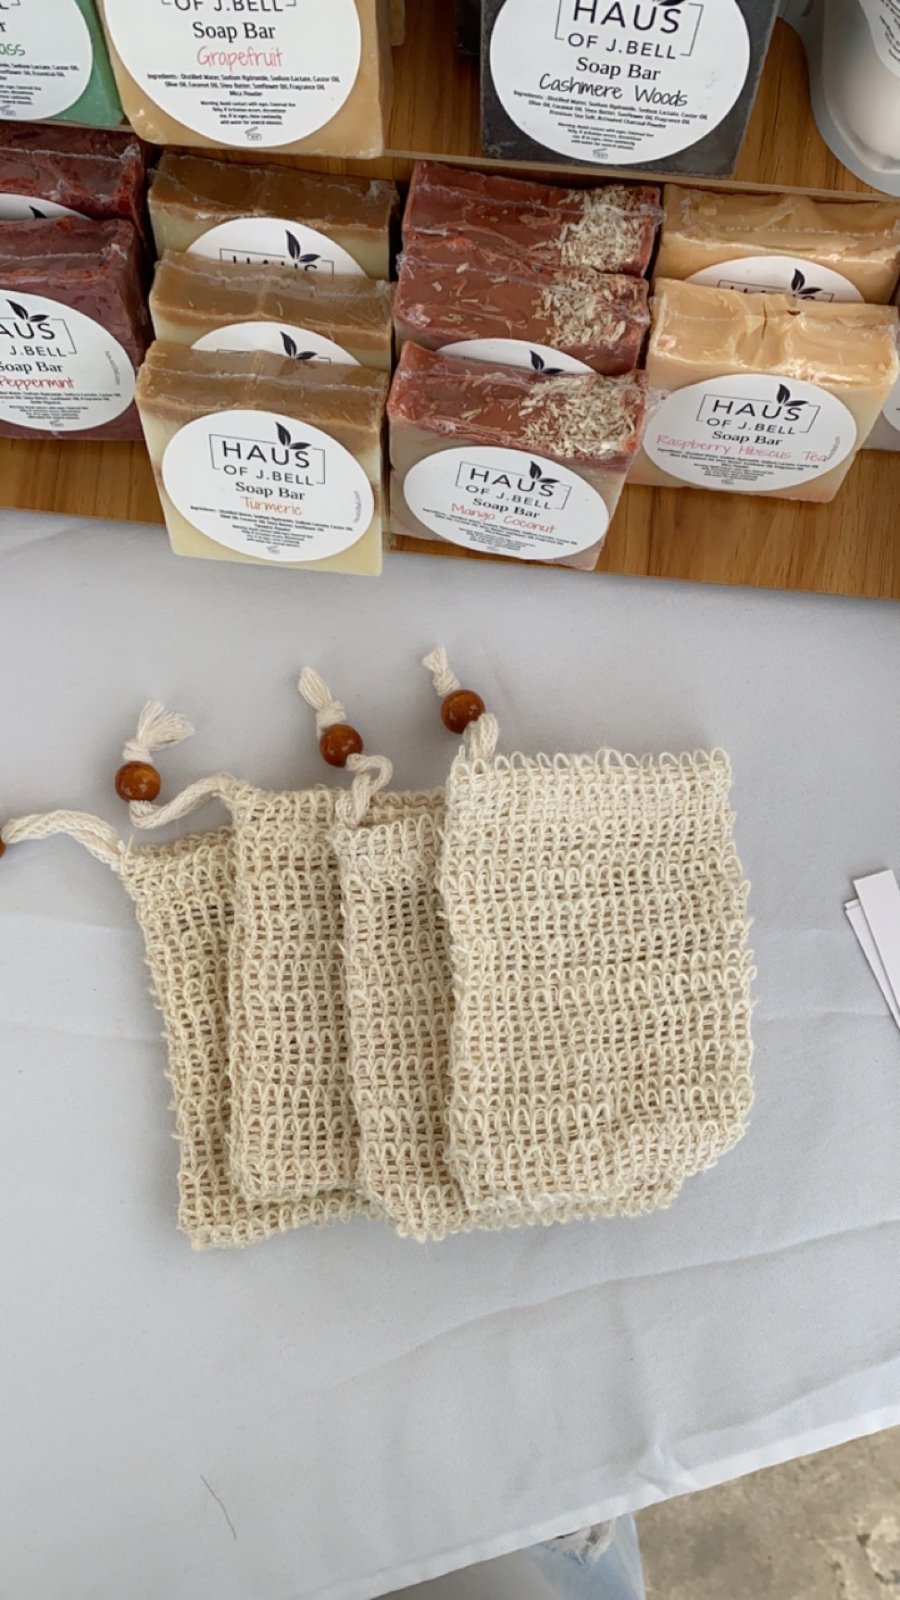 Buy Sisal Soap Bag (5-Pack) Ideal for Scraps & Save Soaps, Natural Fiber Soap  Bags for Foaming and Drying The Soap, Organic Soap Bag With Pouch Holder  for Shower Bath Online at